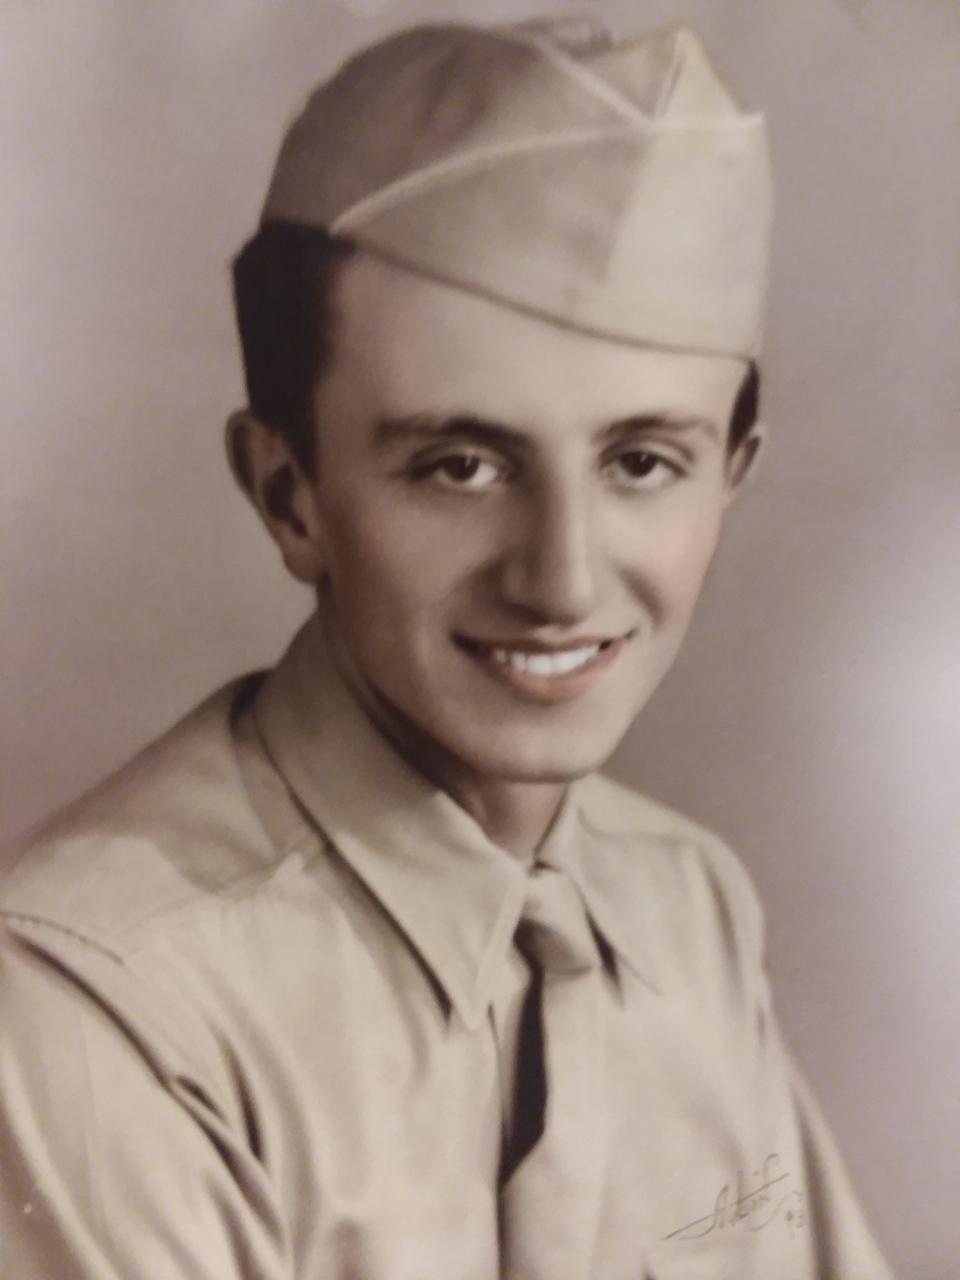 Louis Giarrusso after graduating from Army basic training, about 1943